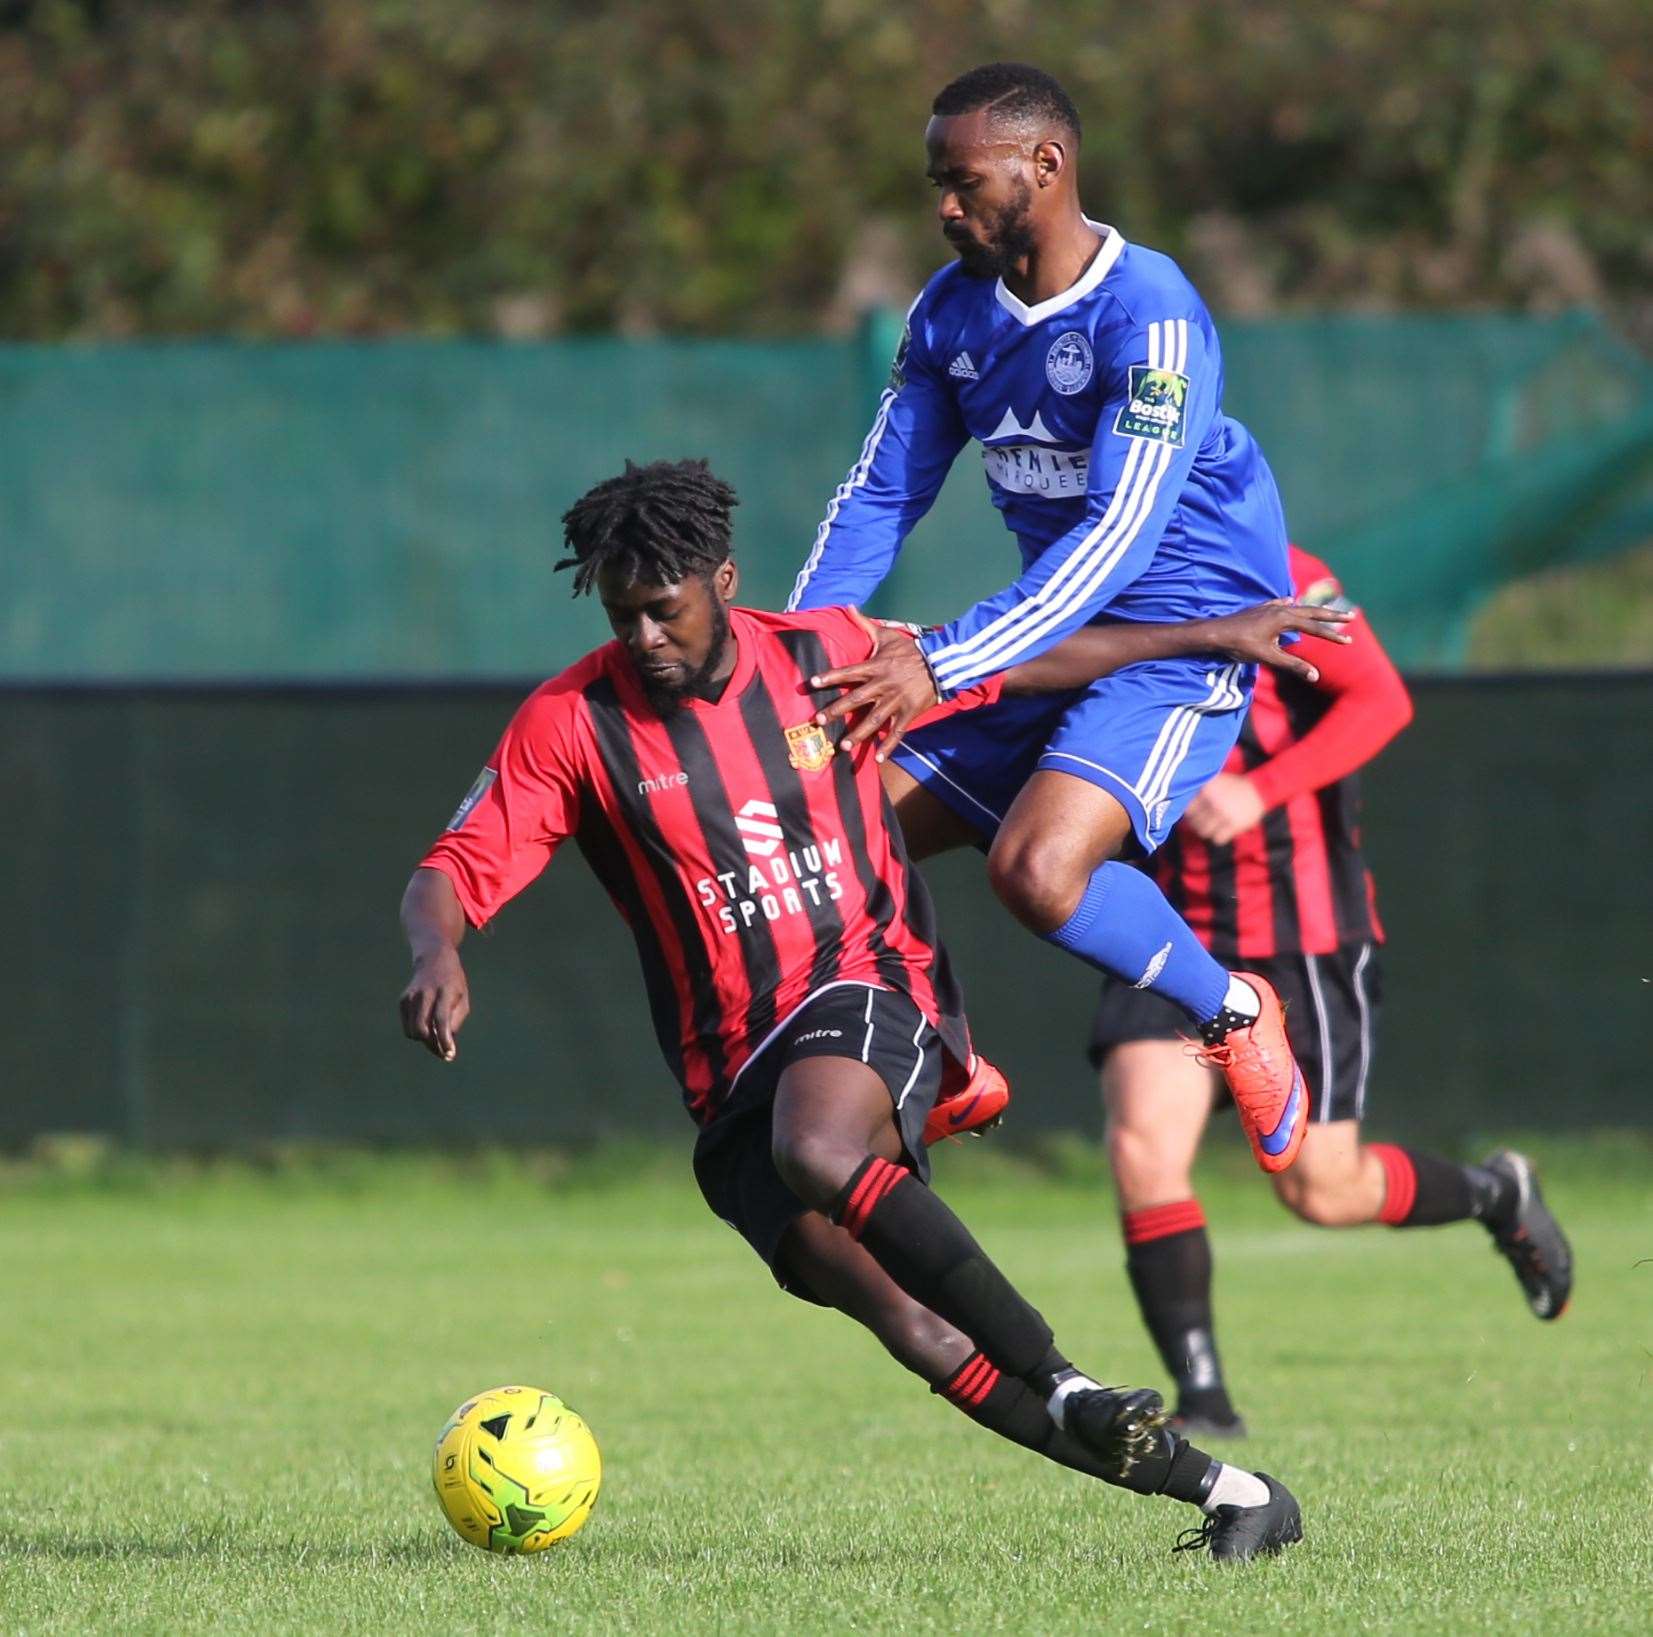 Jerson Dos Santos for Hythe in blue plays against for Bola Dawodu Sittingbourne in red and black at Sittingbourne Football Club. Picture by: John Westhrop FM4942636 (13881036)